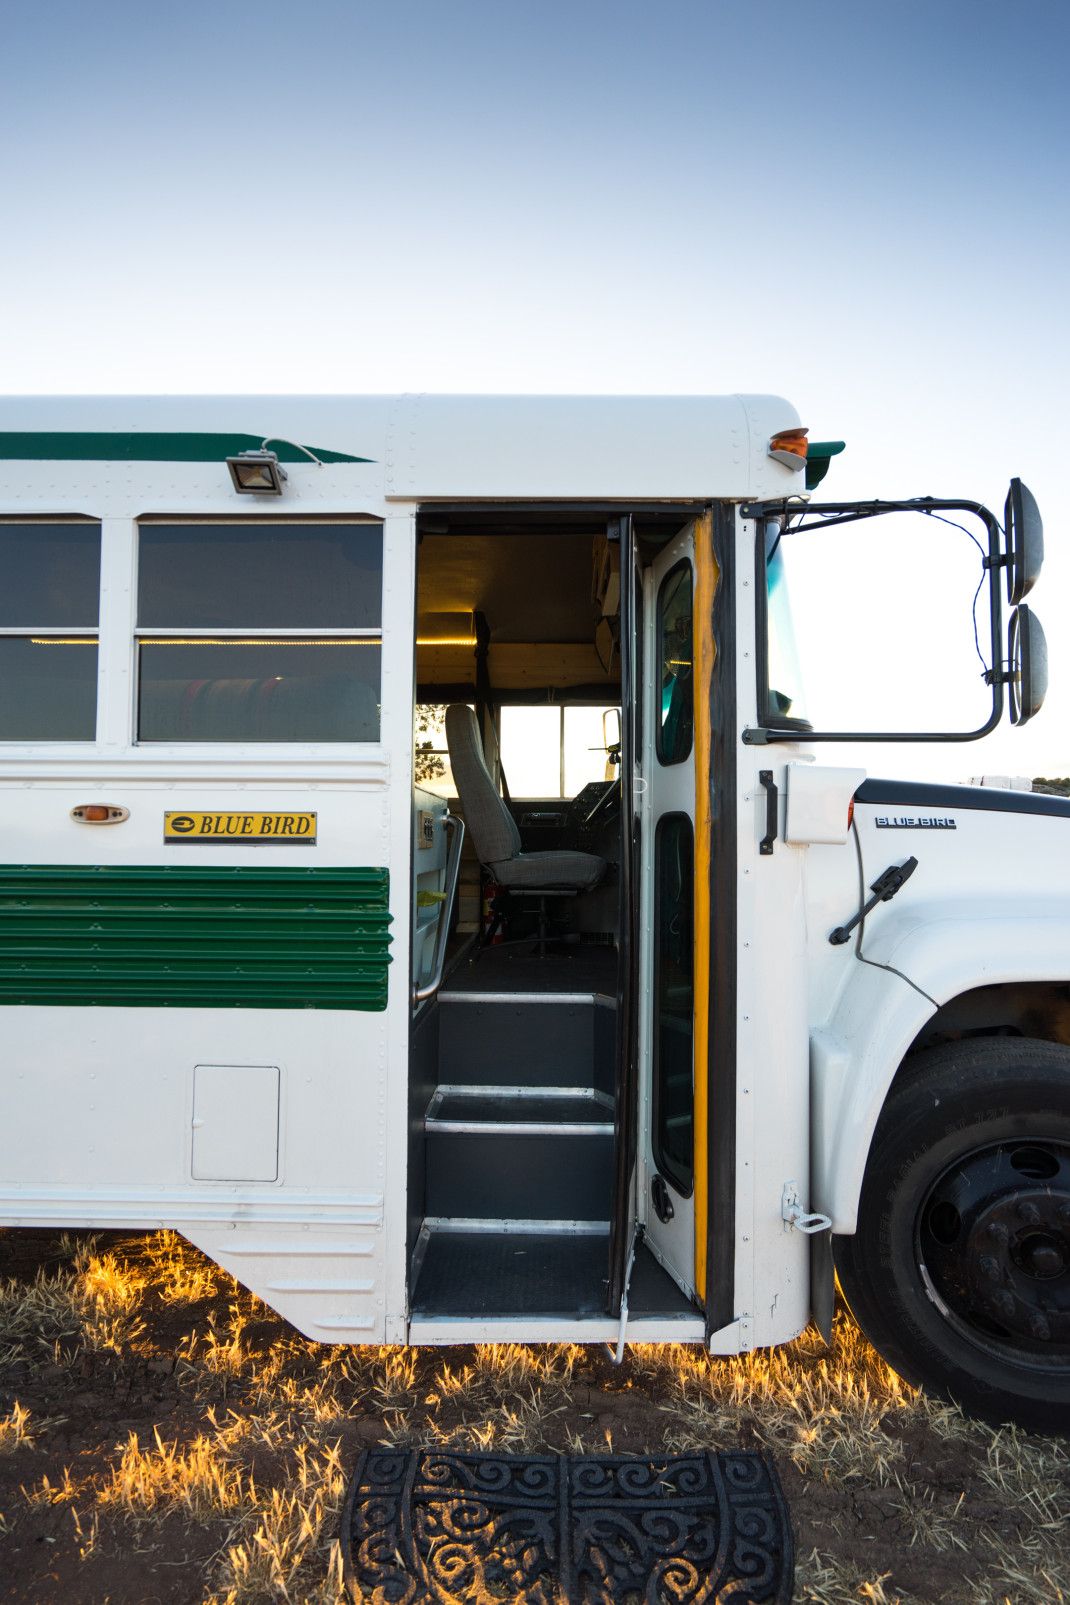 A School Bus Converted Into a Lovely Mobile Home By An Adventurous Couple